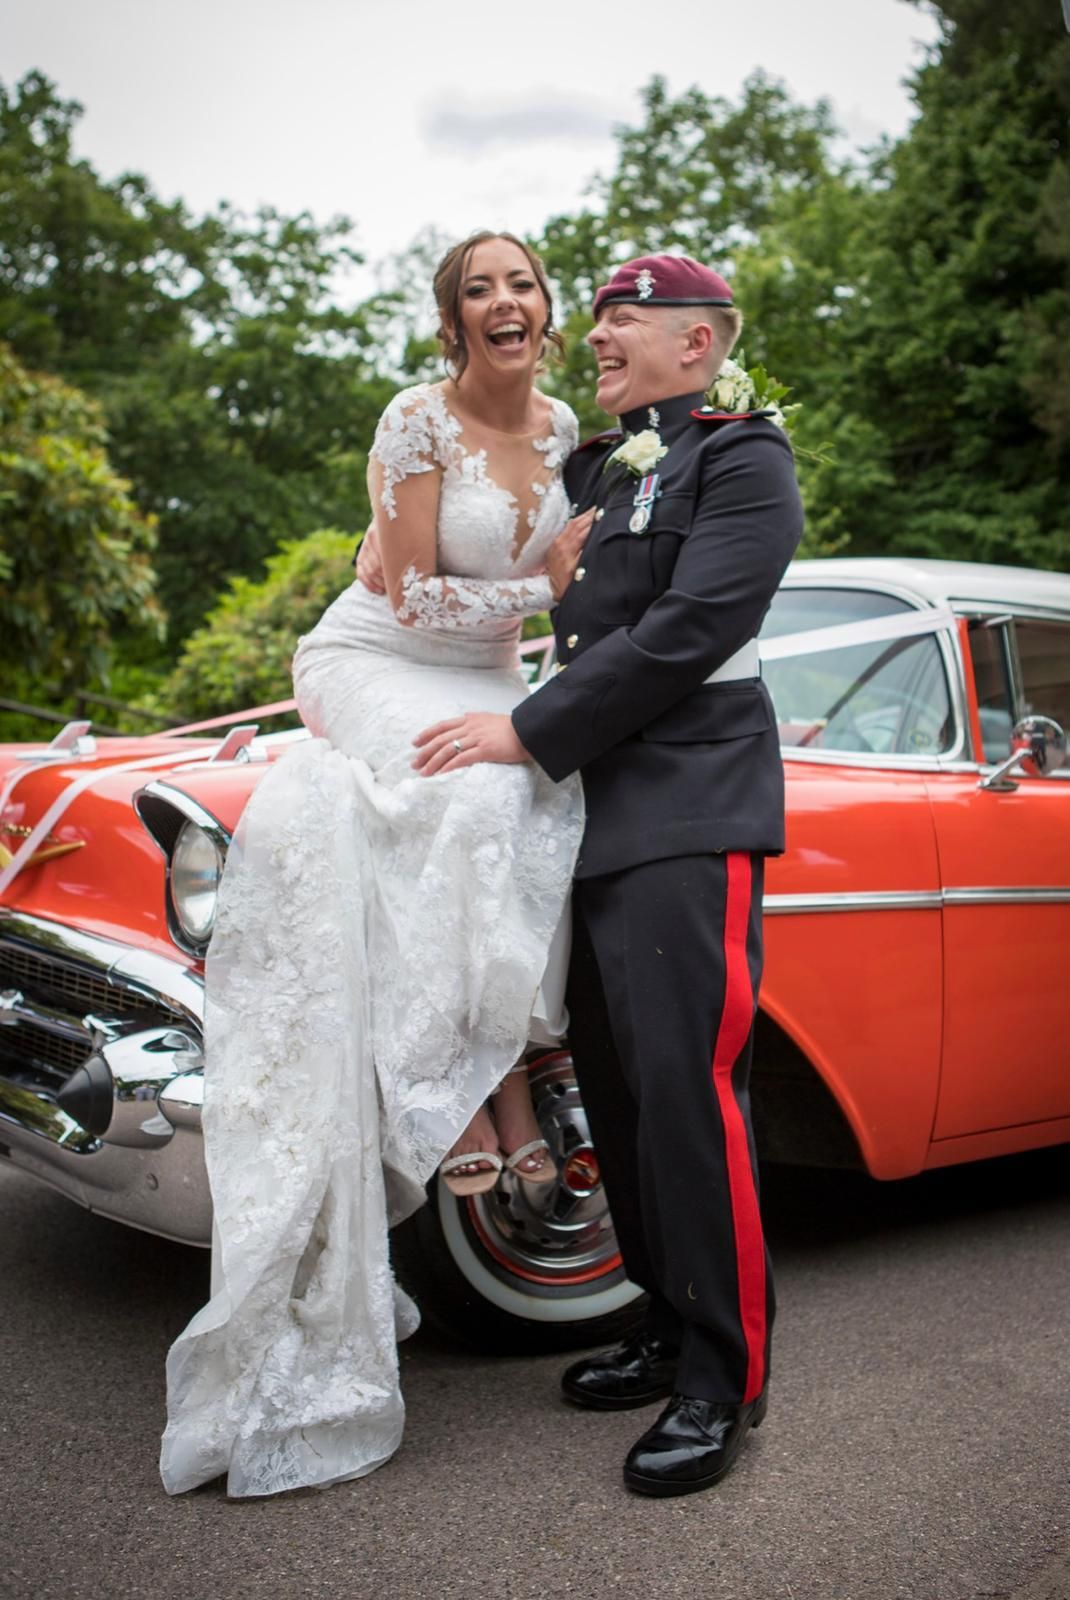 The couple also had a lovely wedding car which they of course made the most of!